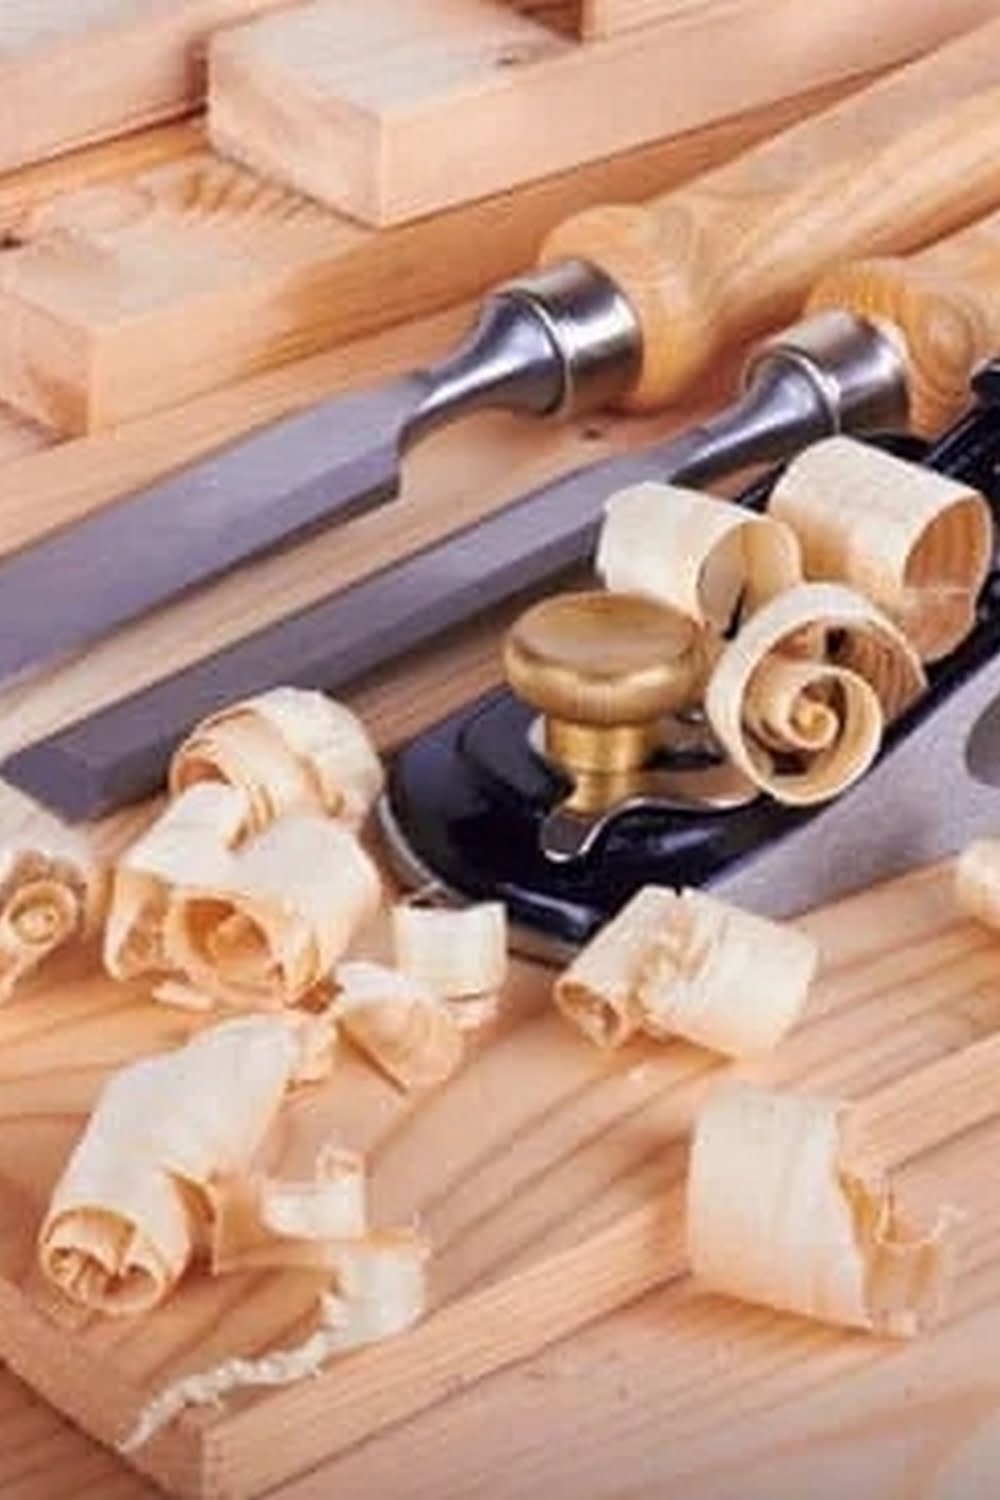 Building Simple Woodworking Projects Is Easier Than You Think